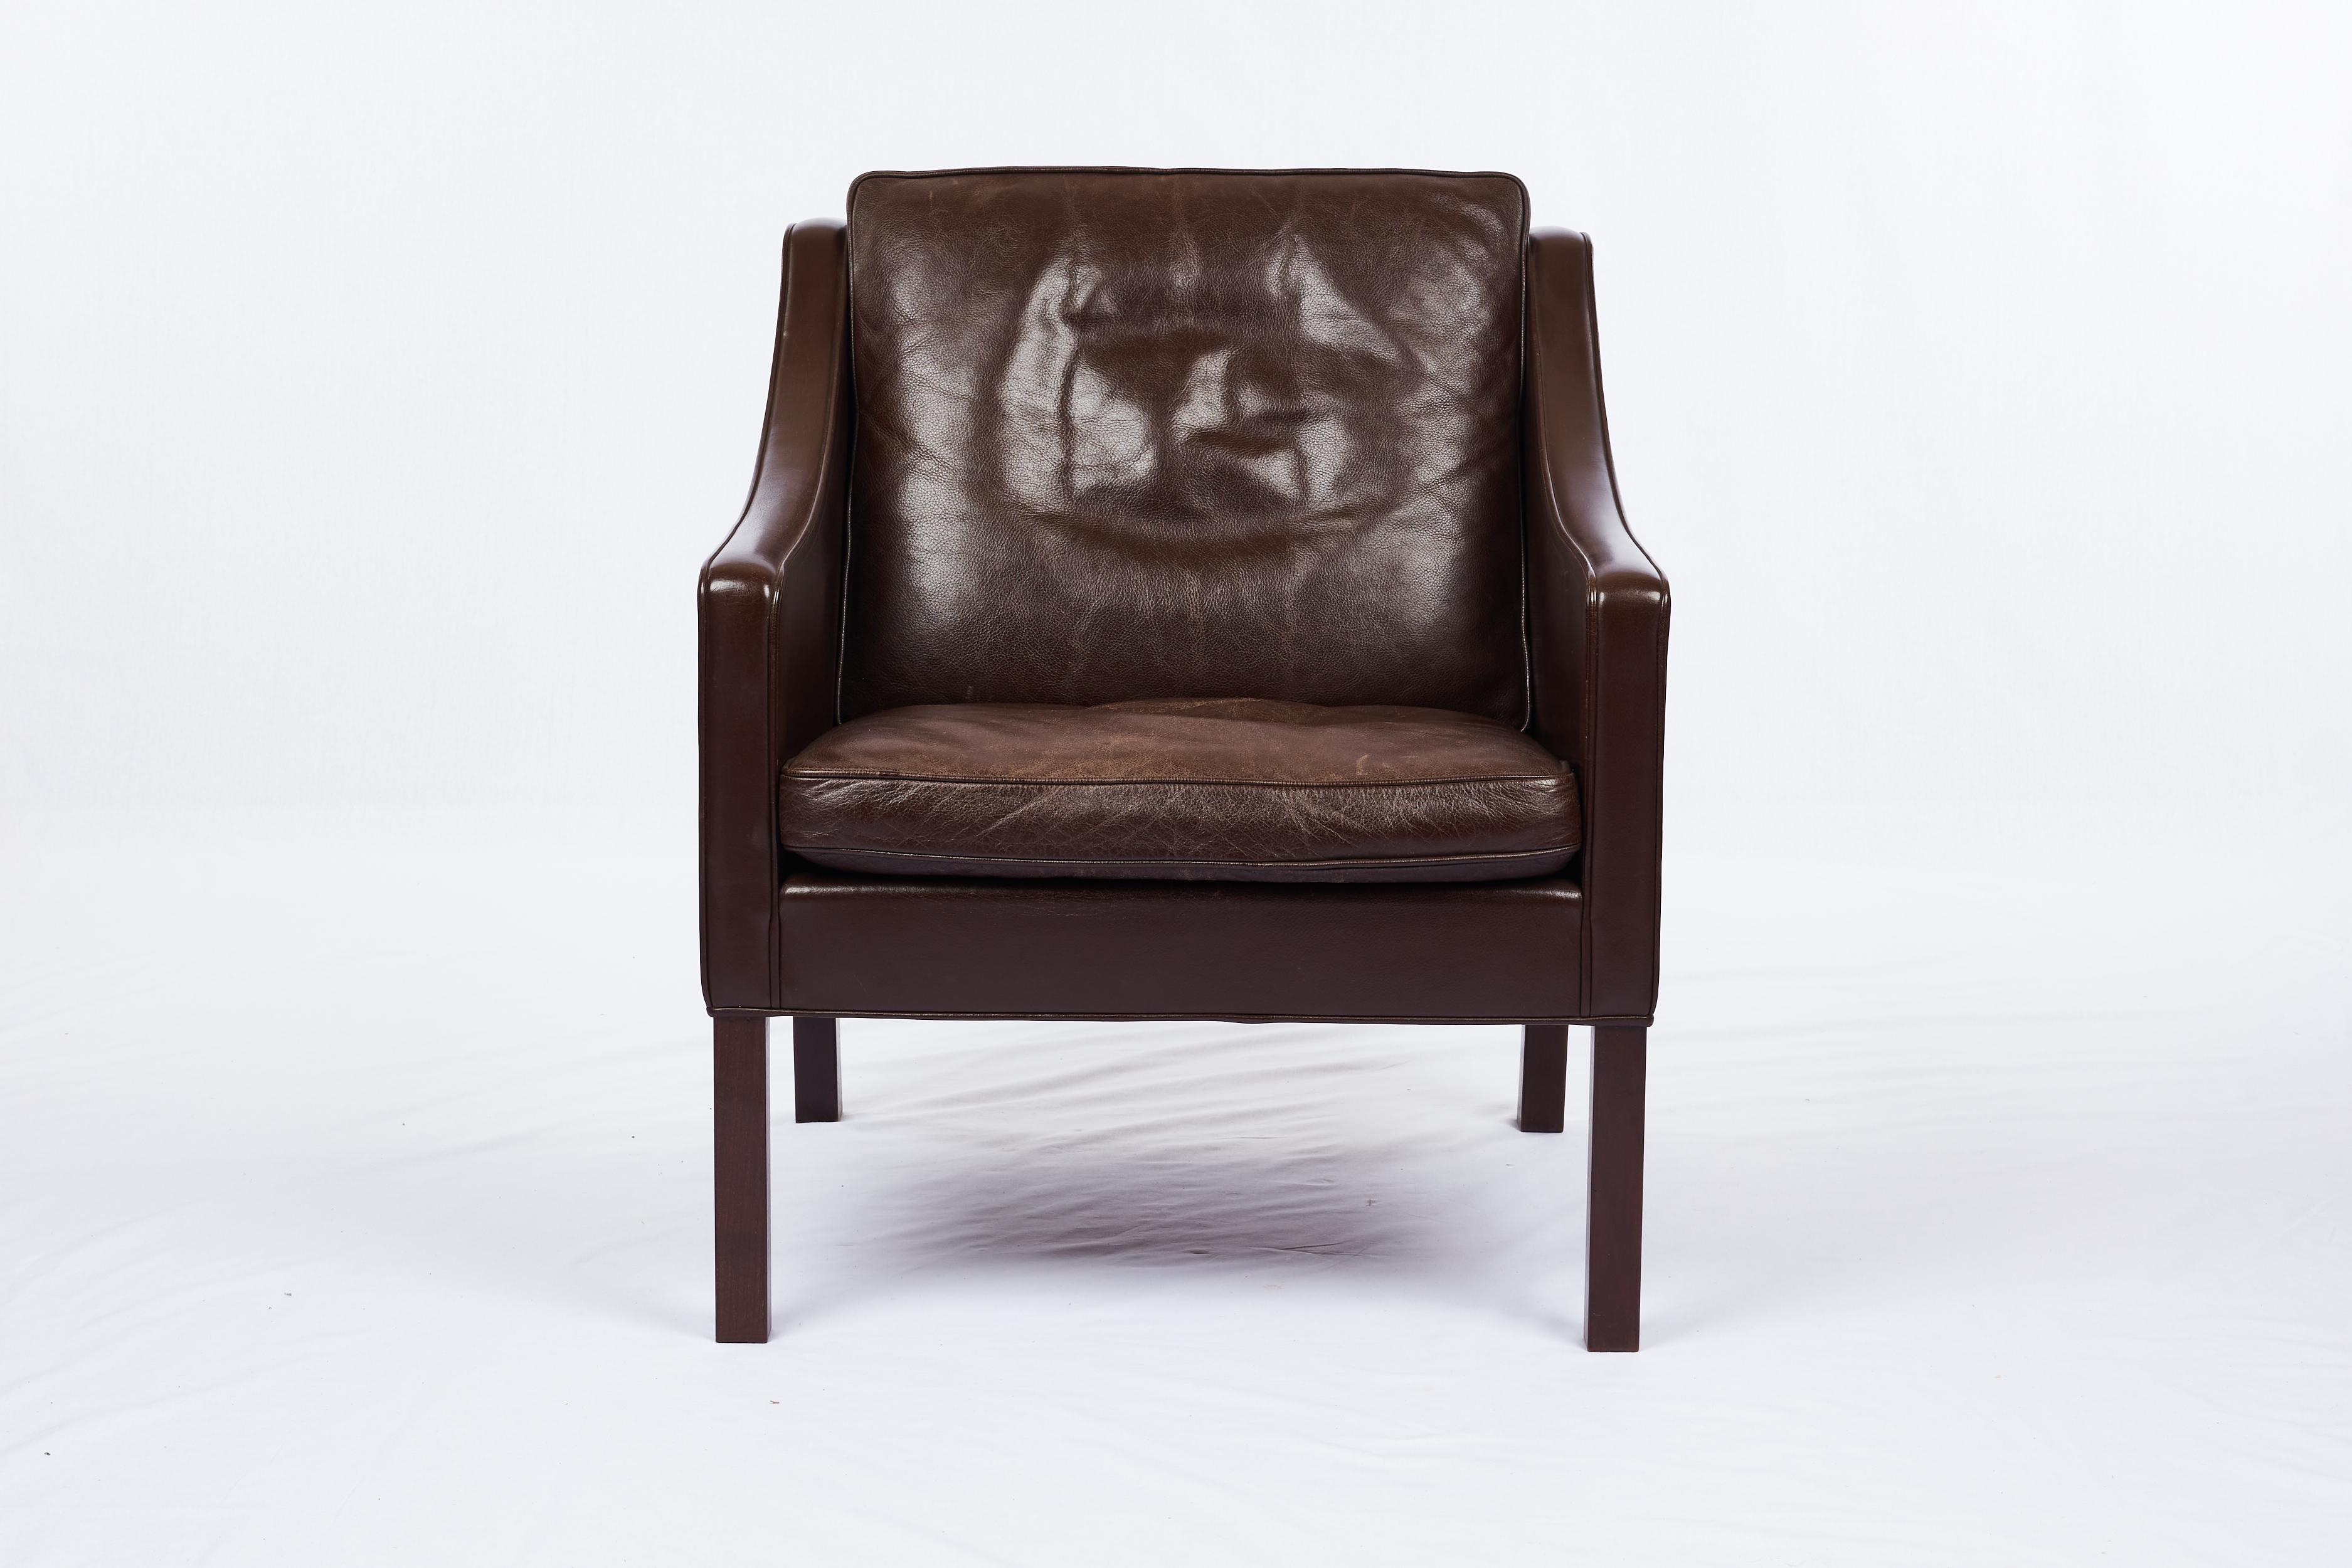 Borge Mogensen Model #2207 Leather lounge chair Produced by Fredericia Mobelfabrik.